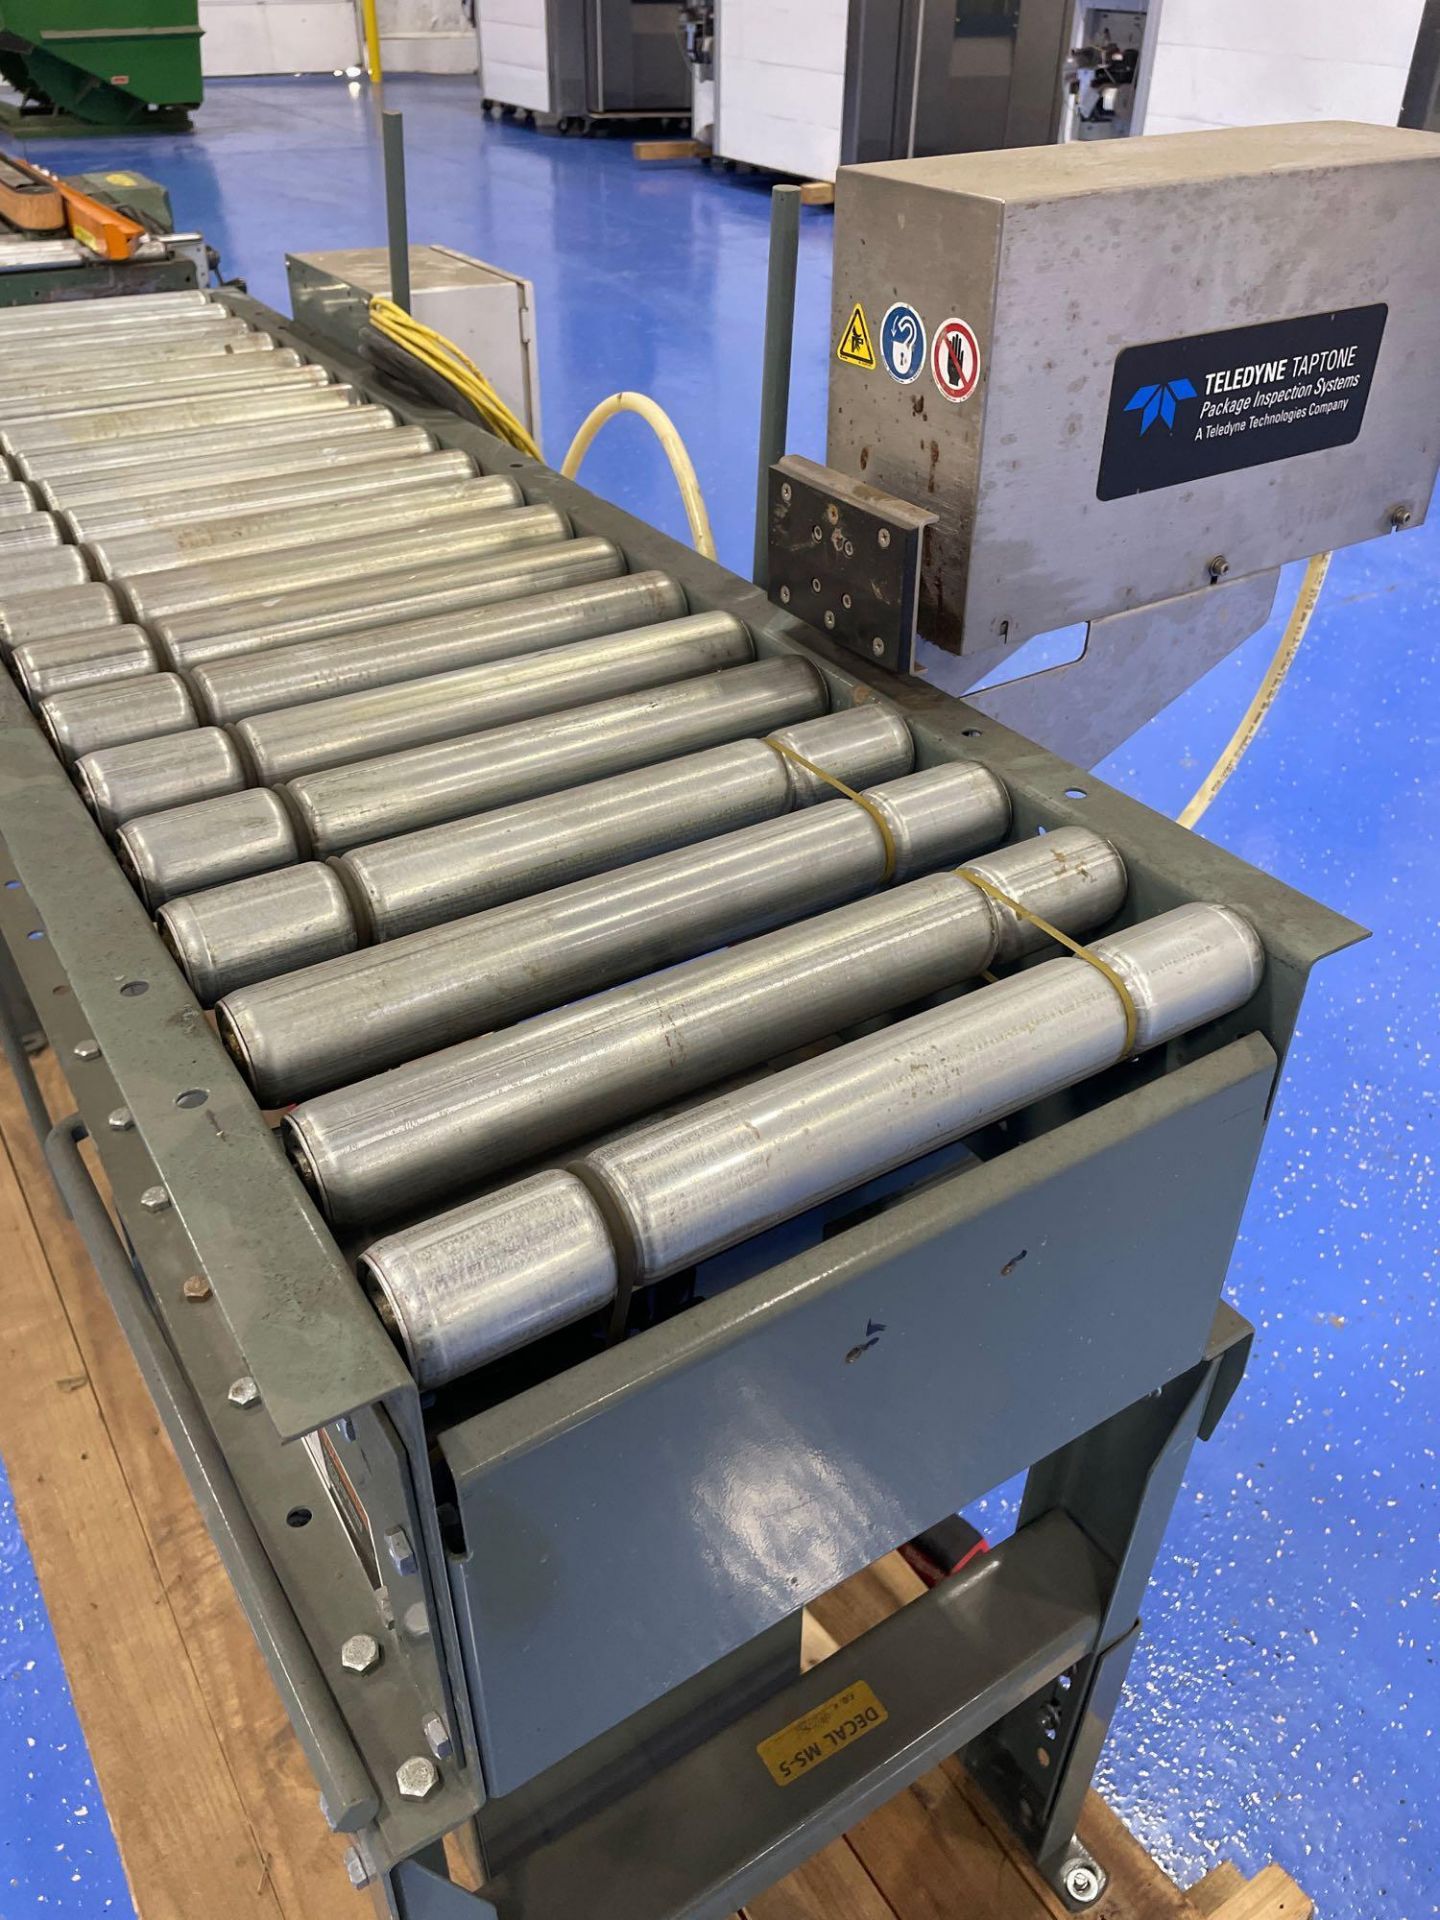 Hytrol Powered Roller Conveyor with Teledyne Taptone Reject System - Image 5 of 13